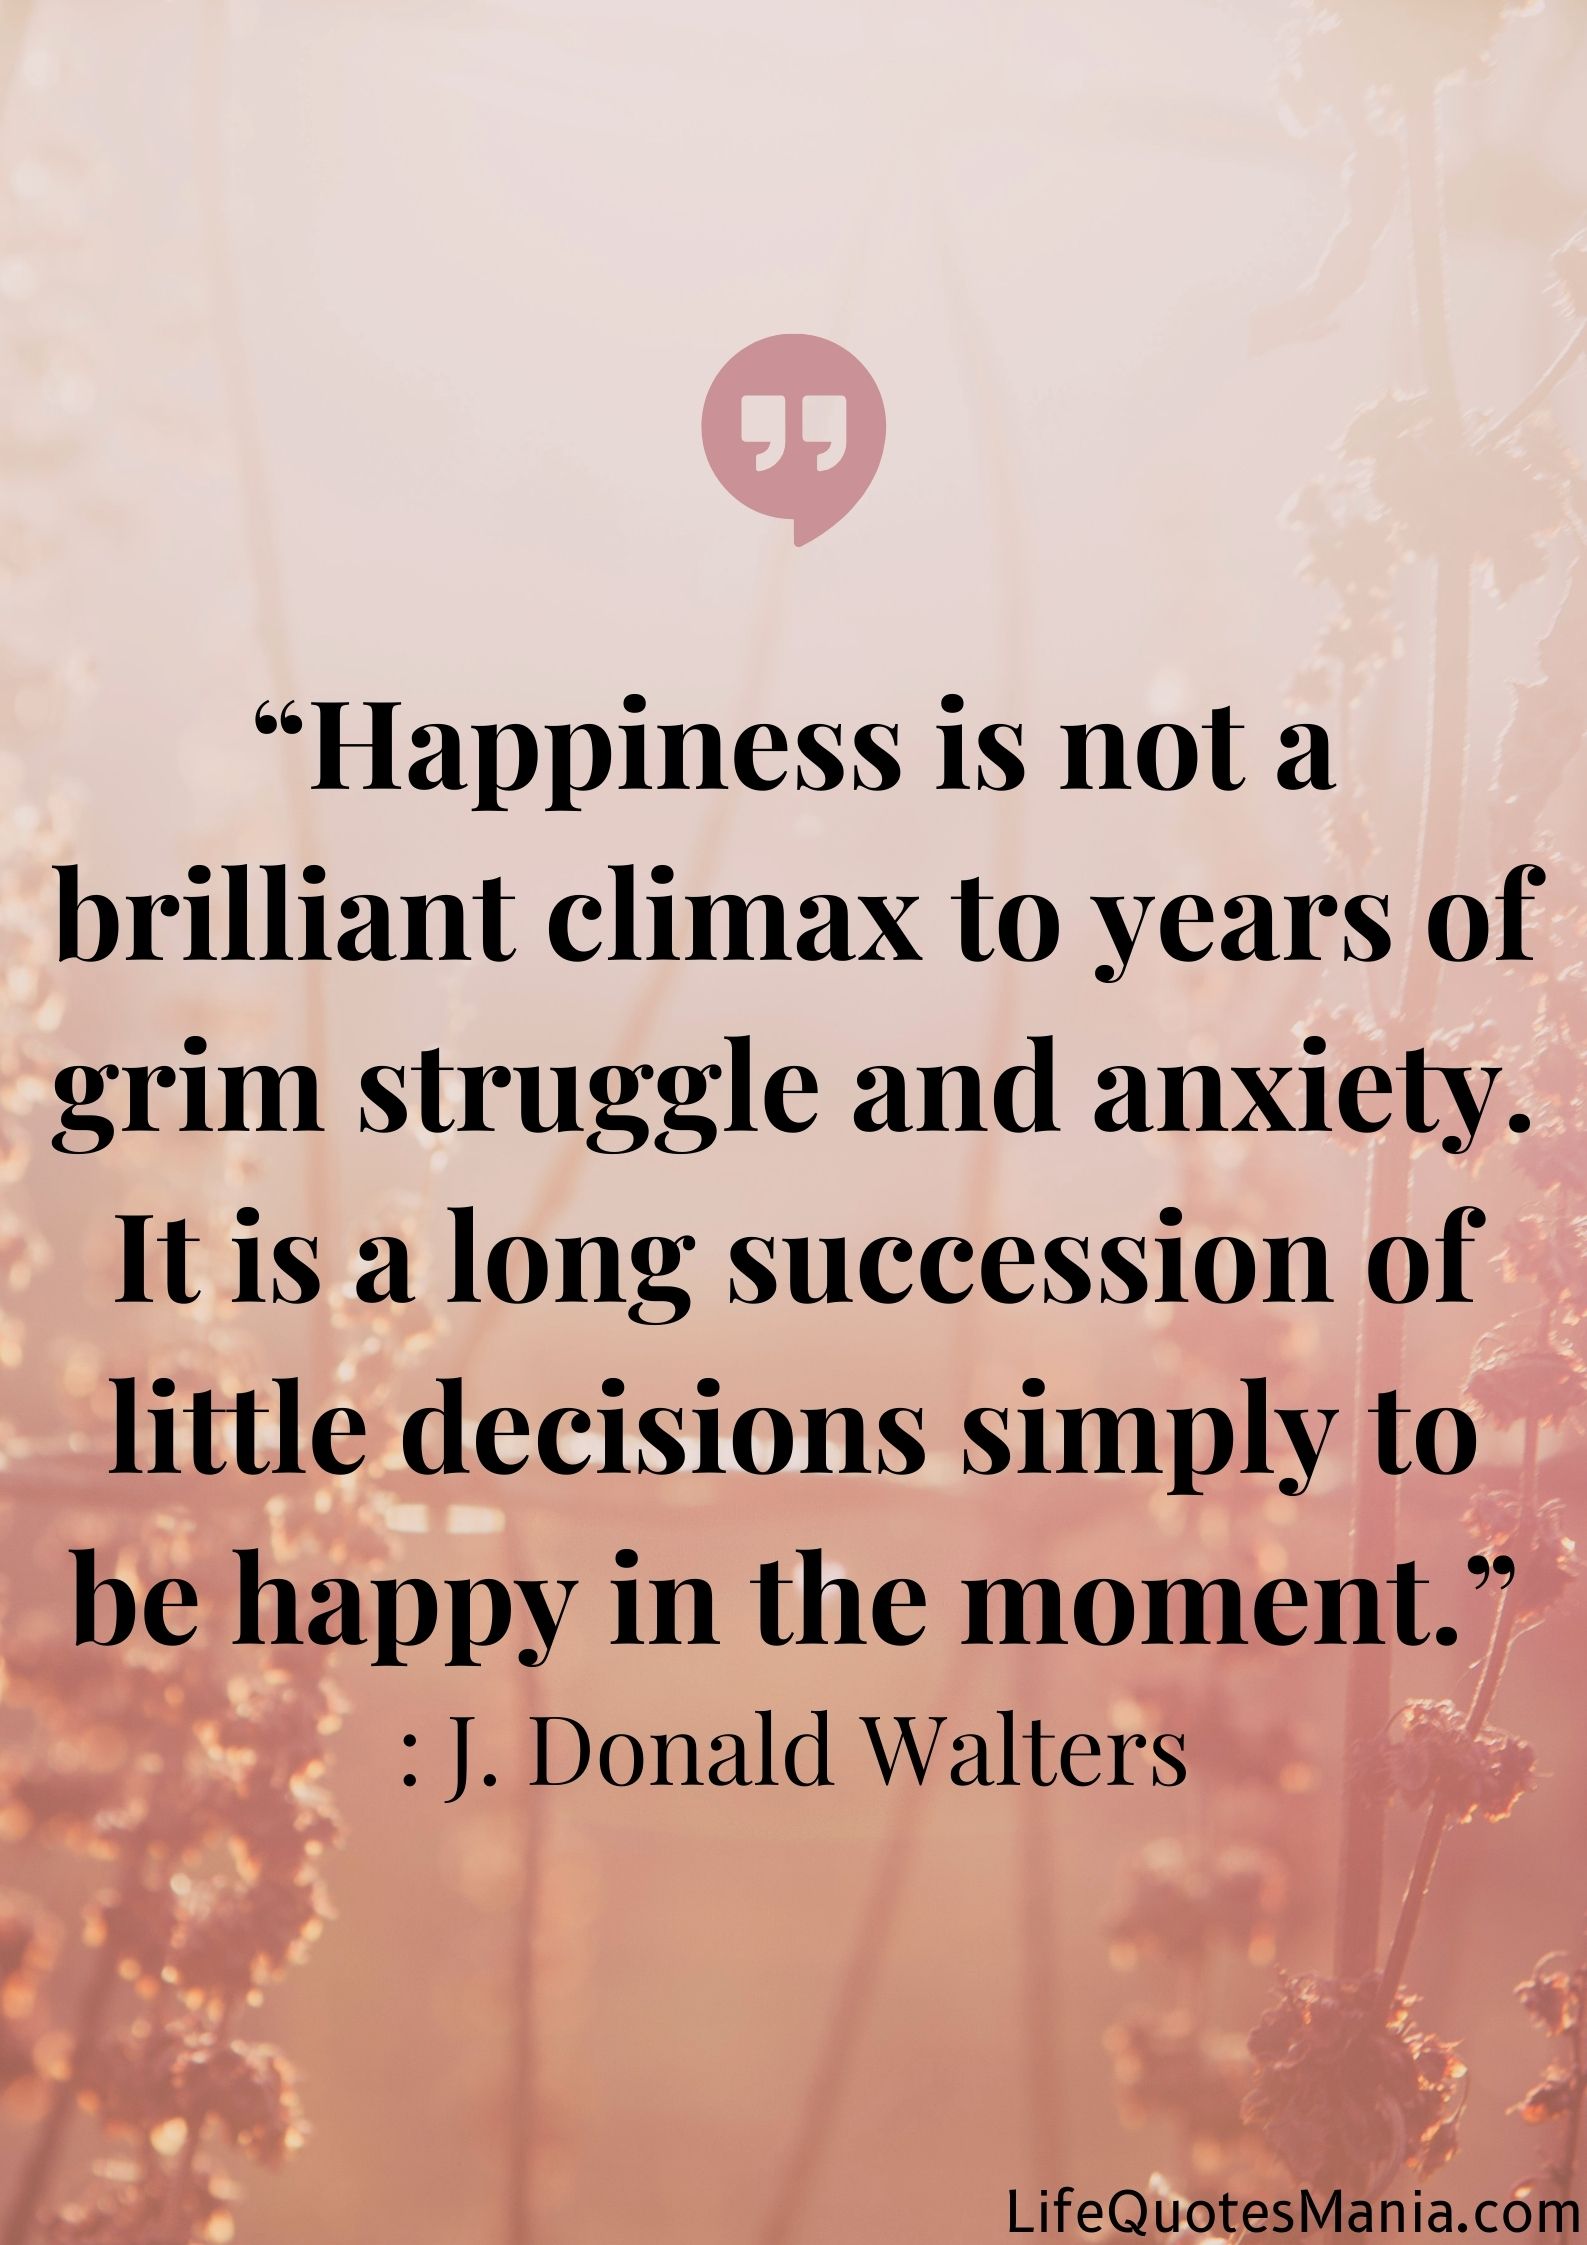 Anxiety Quotes - J. Donald Walters